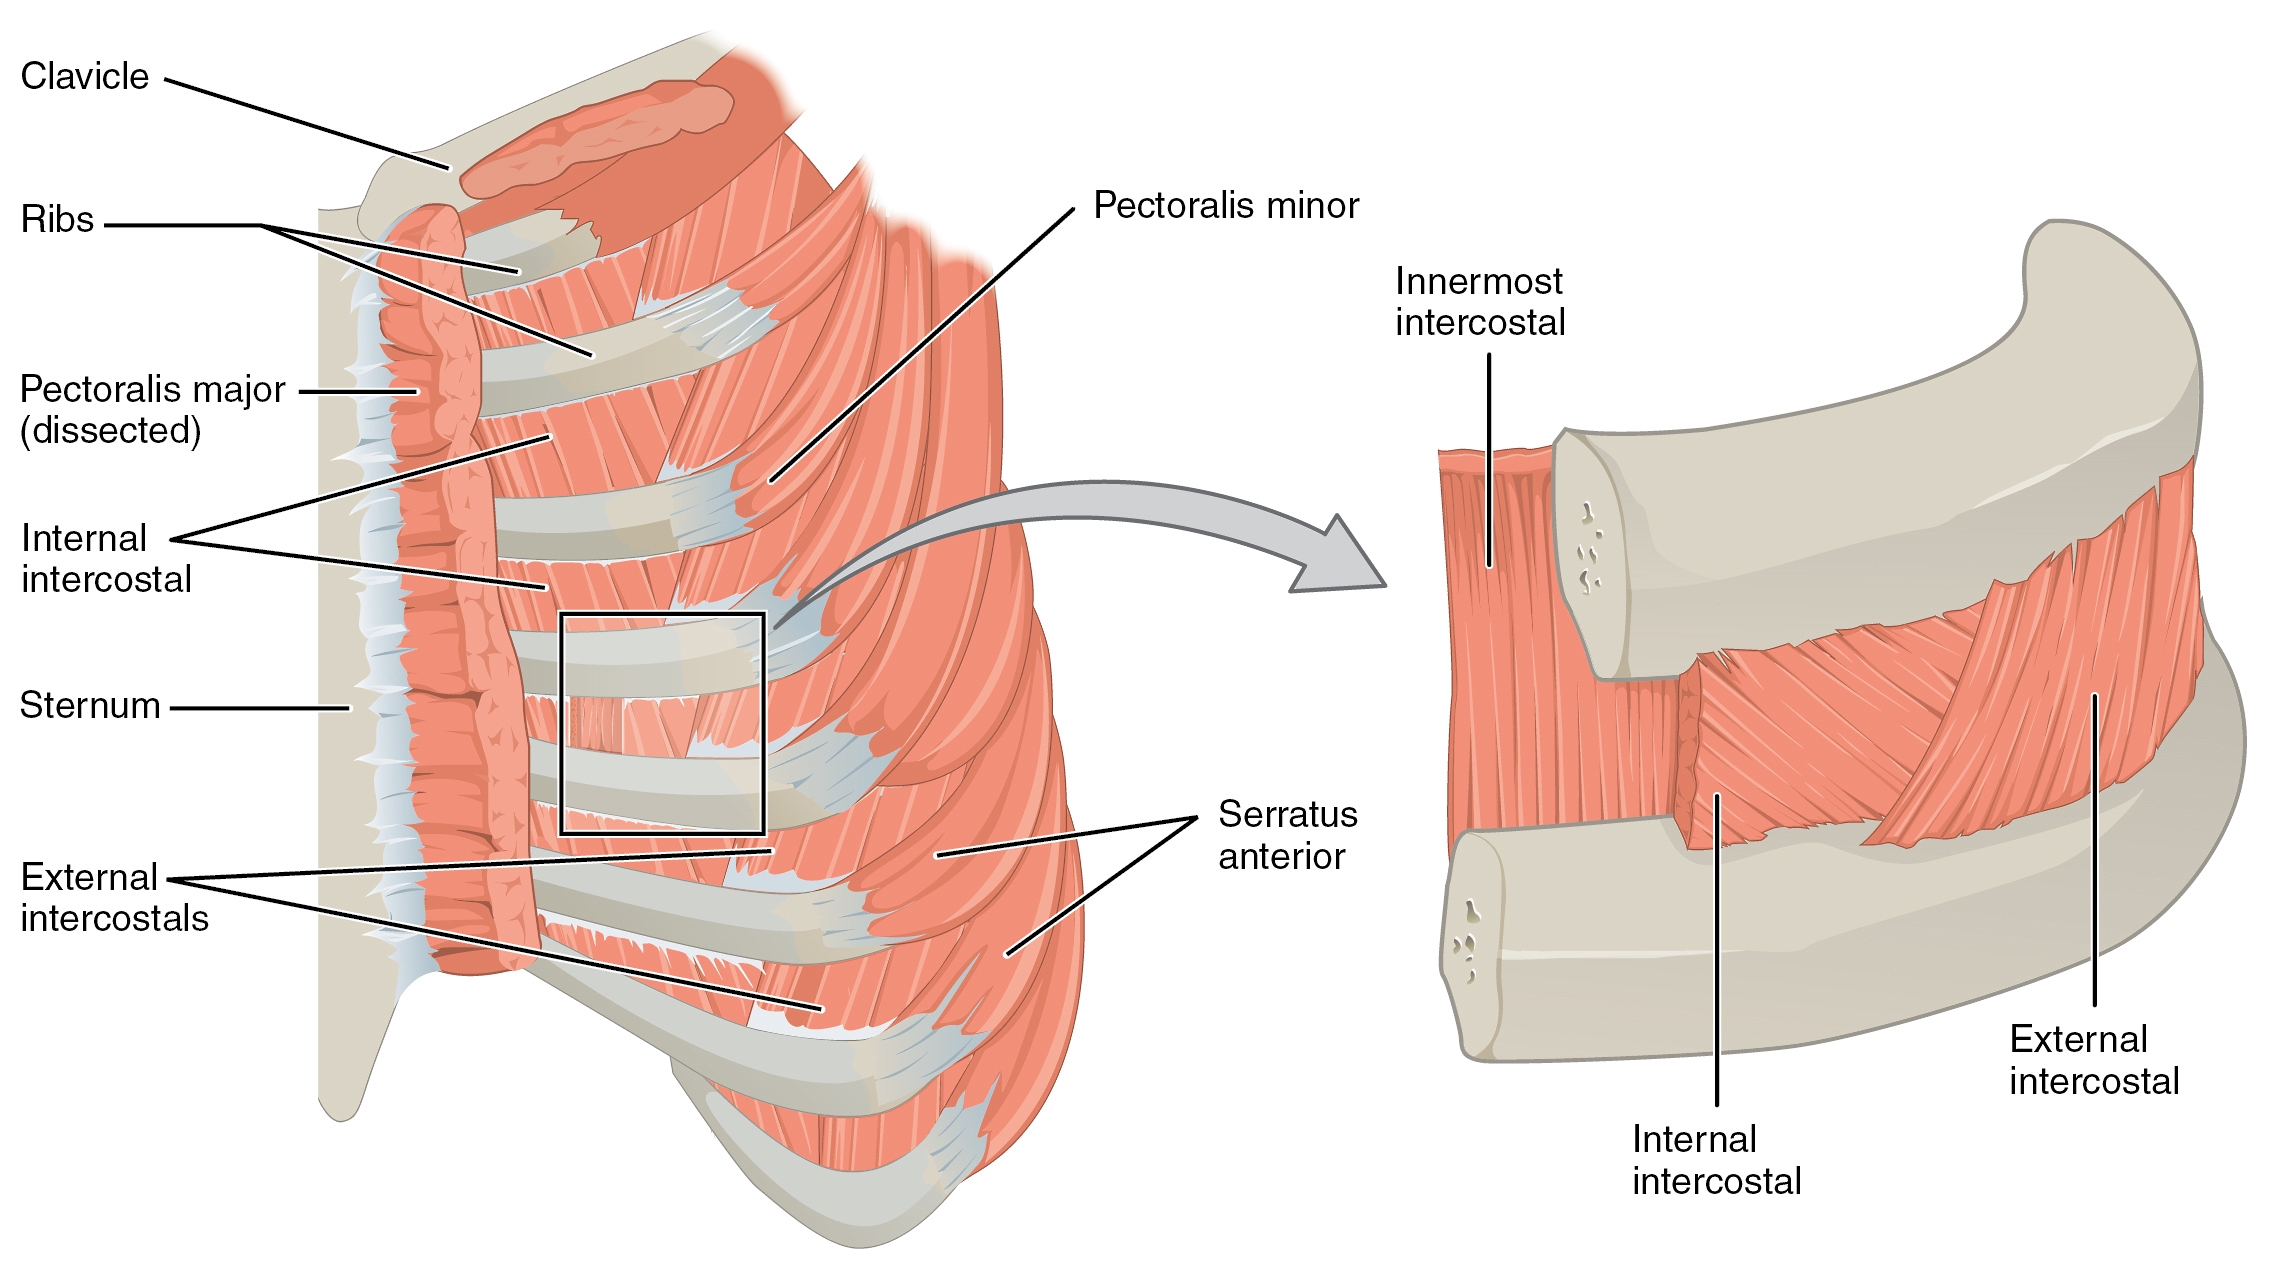 The figure shows a thoracic section and related muscles.